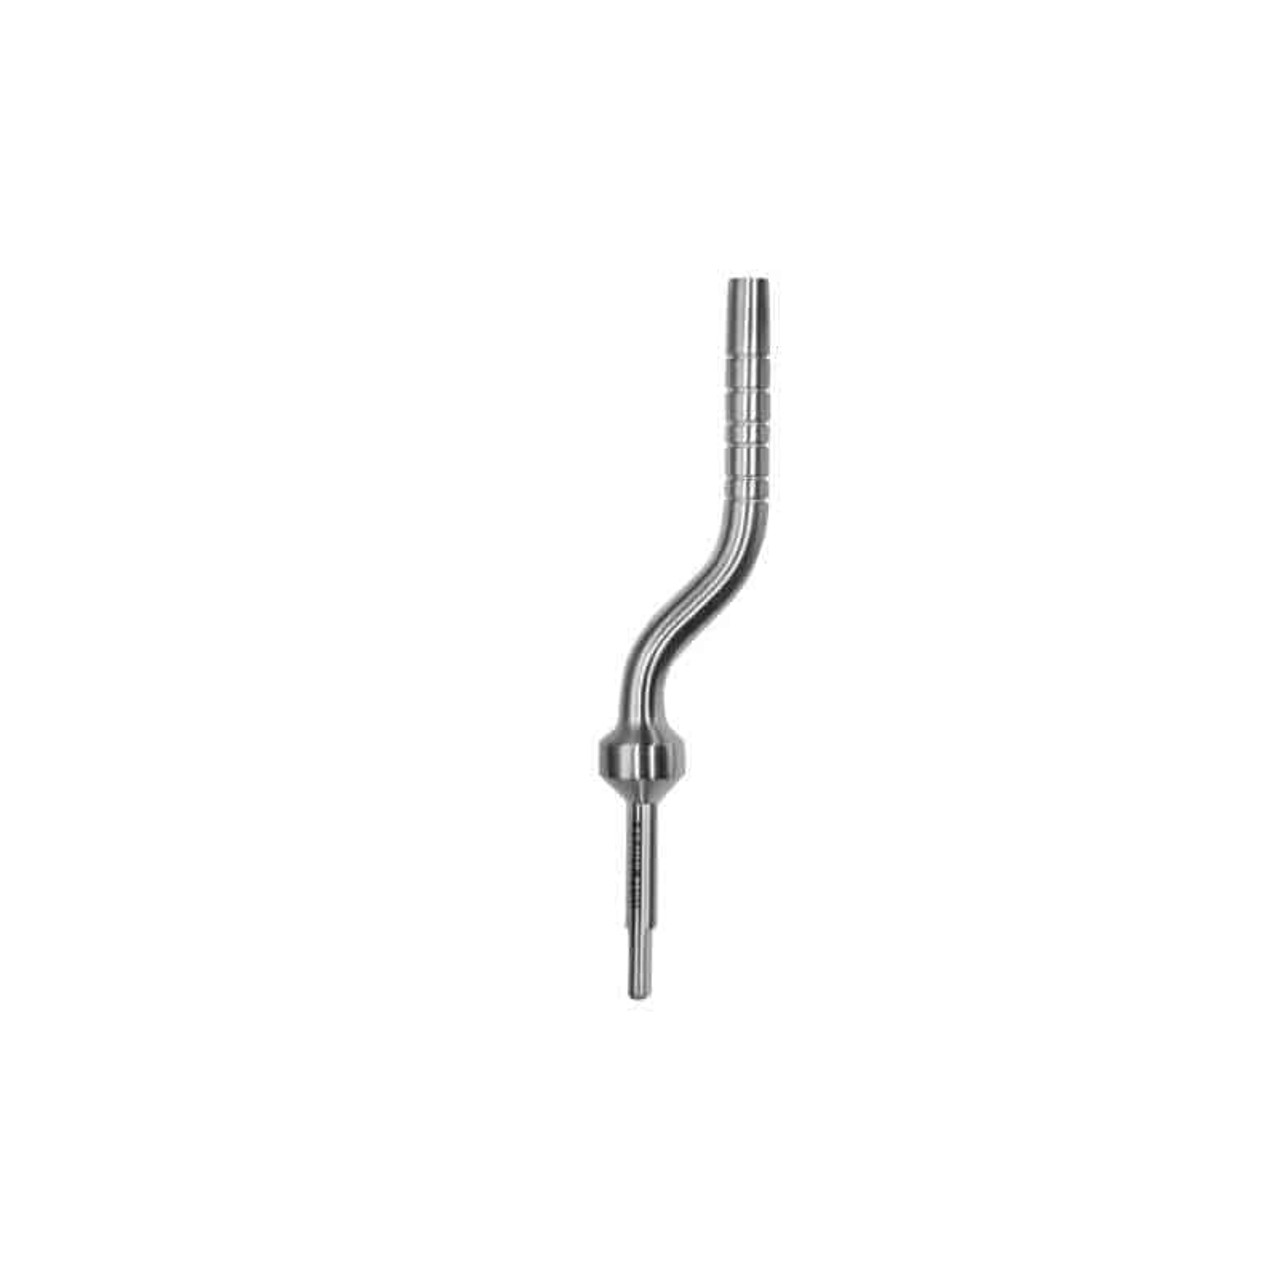 Hu-Friedy - 4.2 mm Osteotome Tapered Concave - Angulated Tip